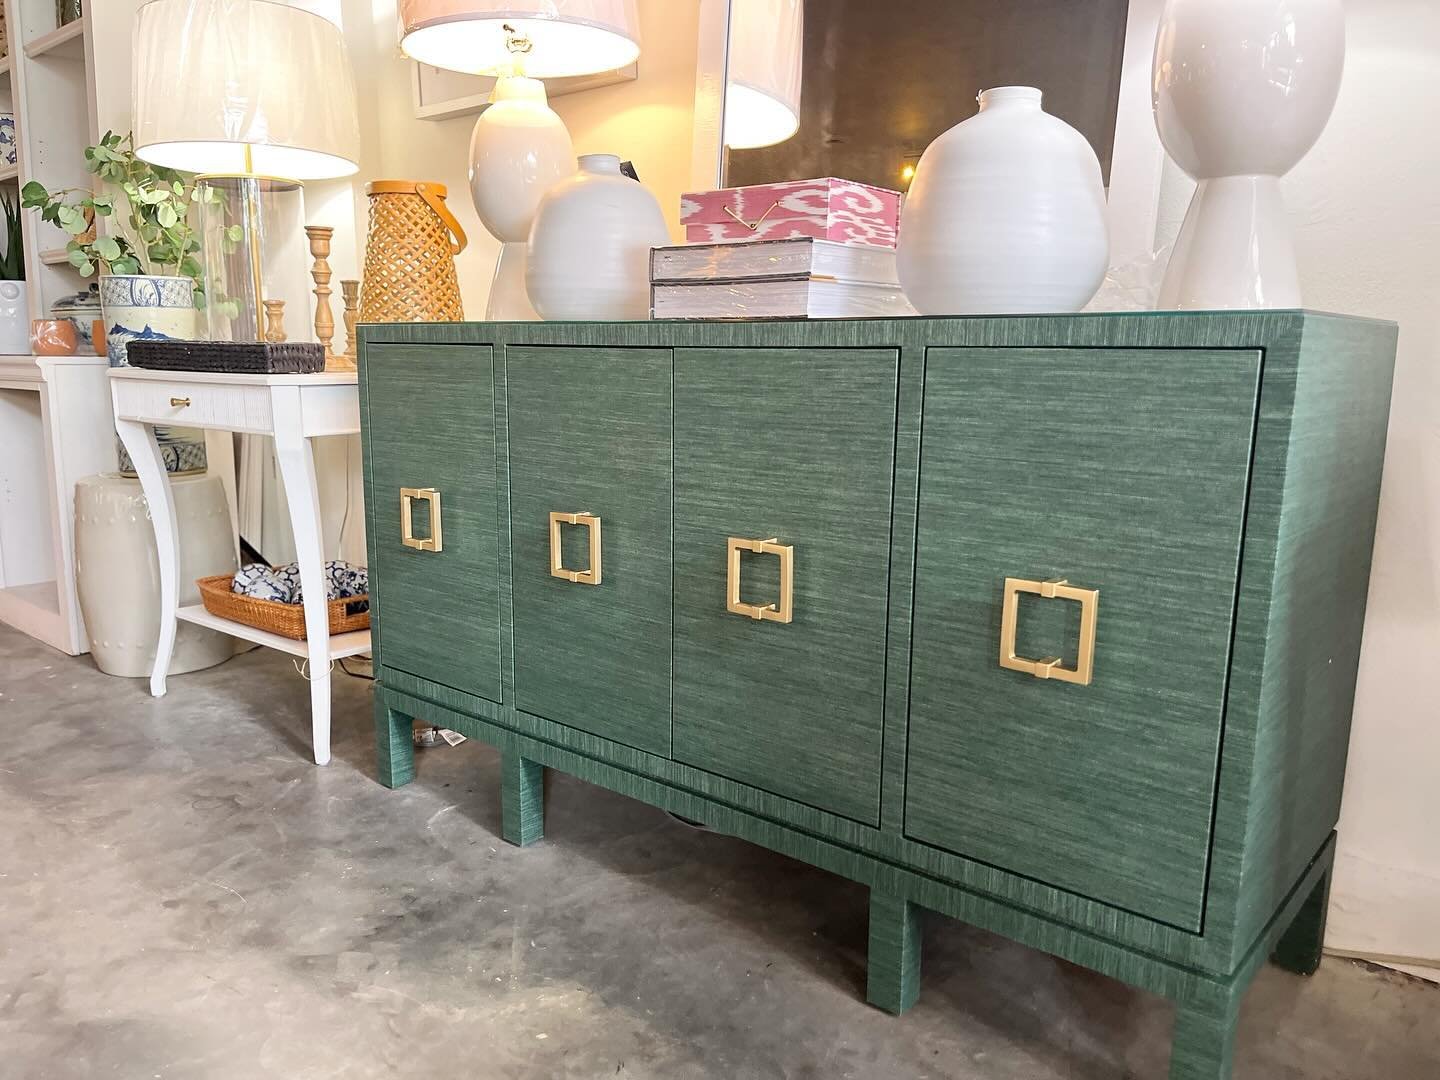 a beautiful buffet with storage to hide things 😘